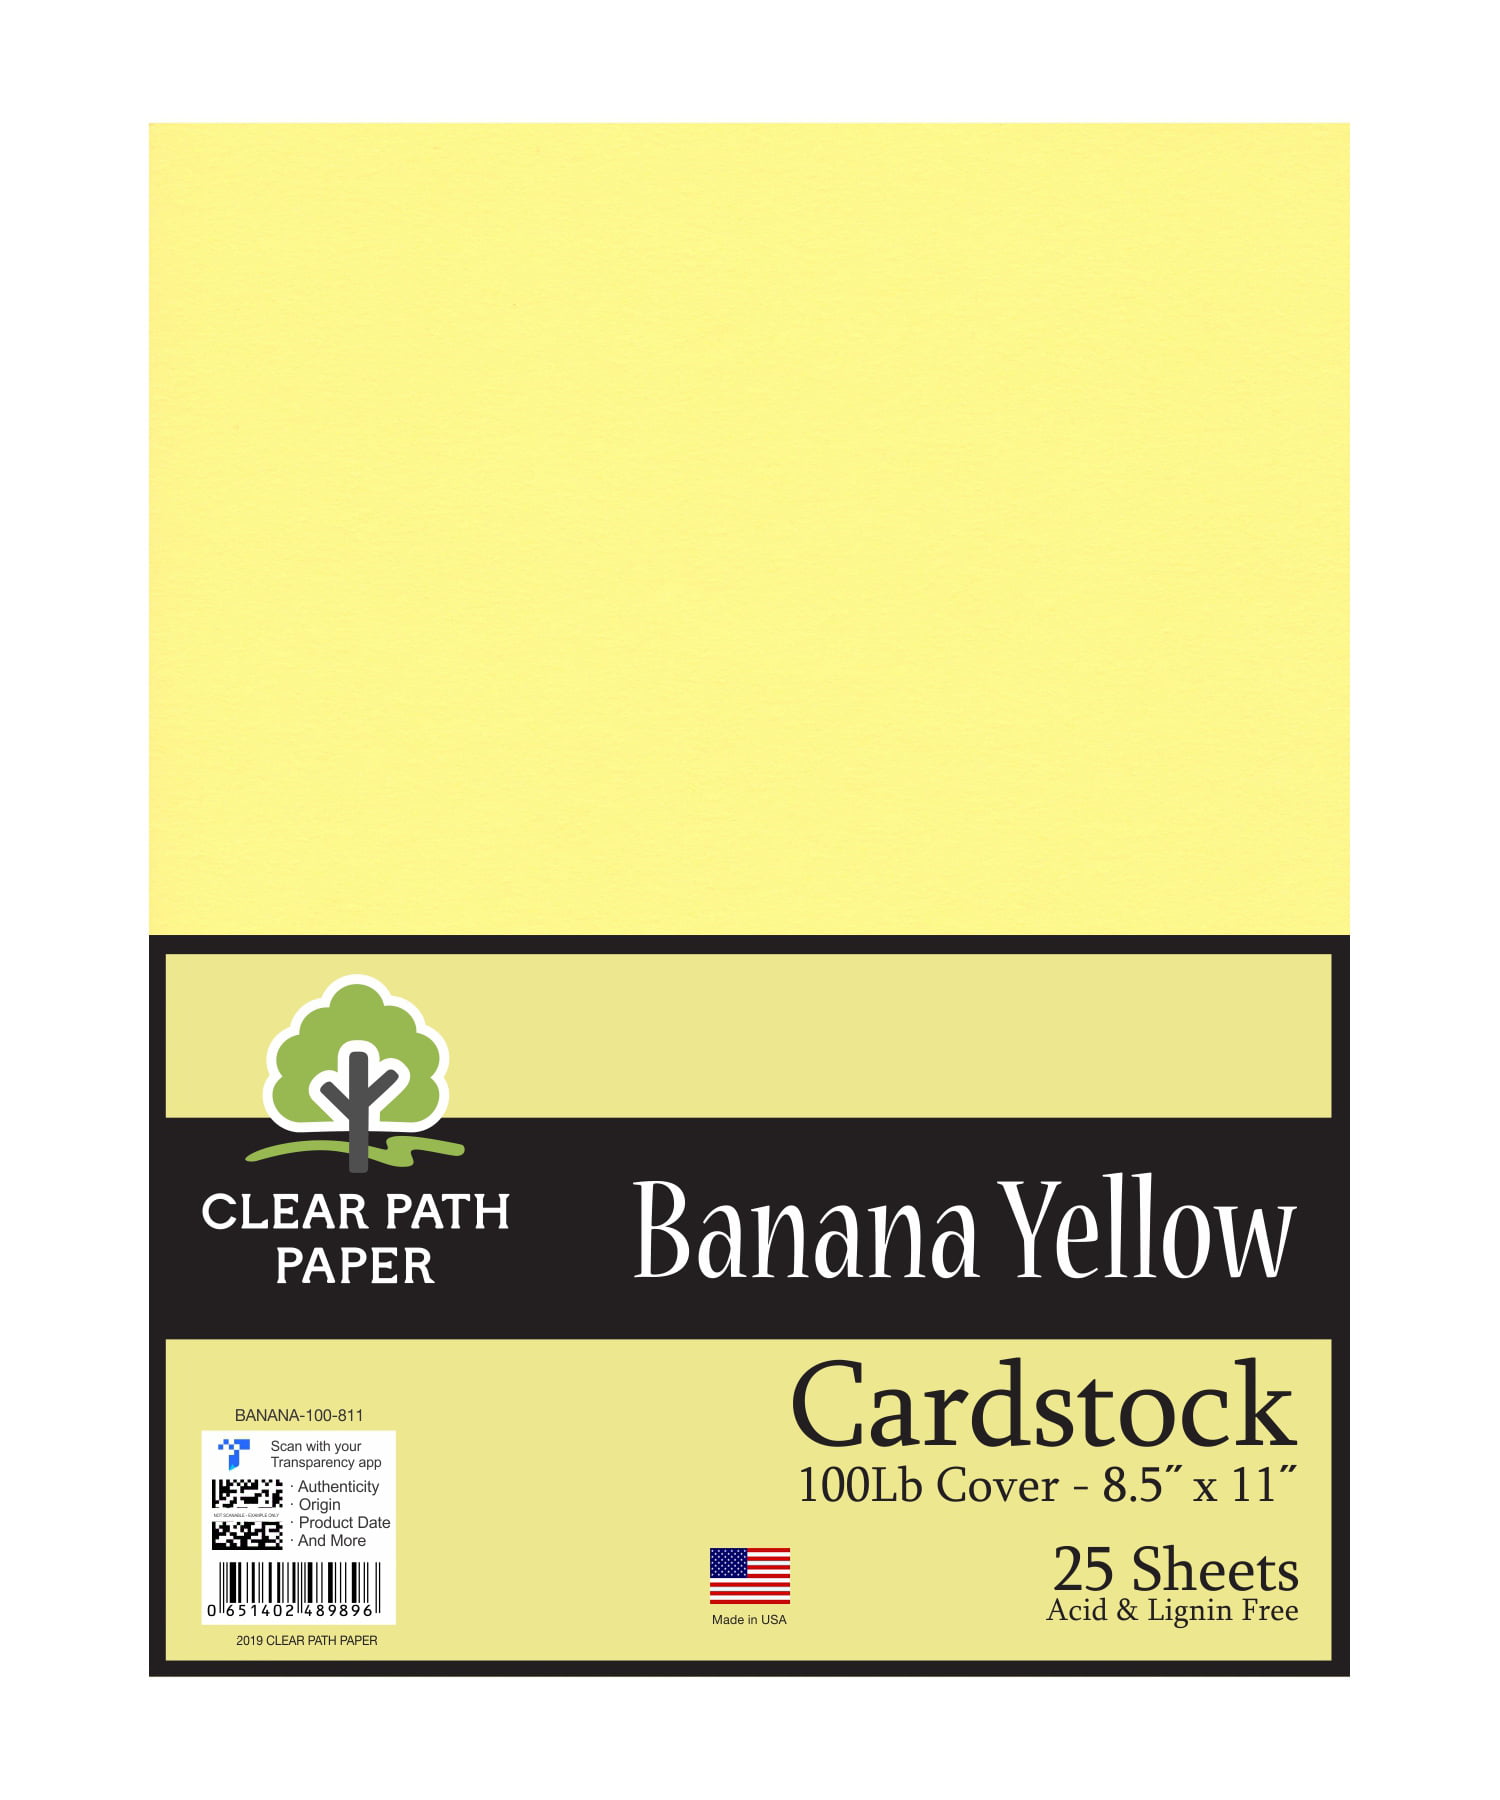 Banana Yellow Cardstock - 8.5 x 11 inch - 65Lb Cover - 100 Sheets - Clear  Path Paper 